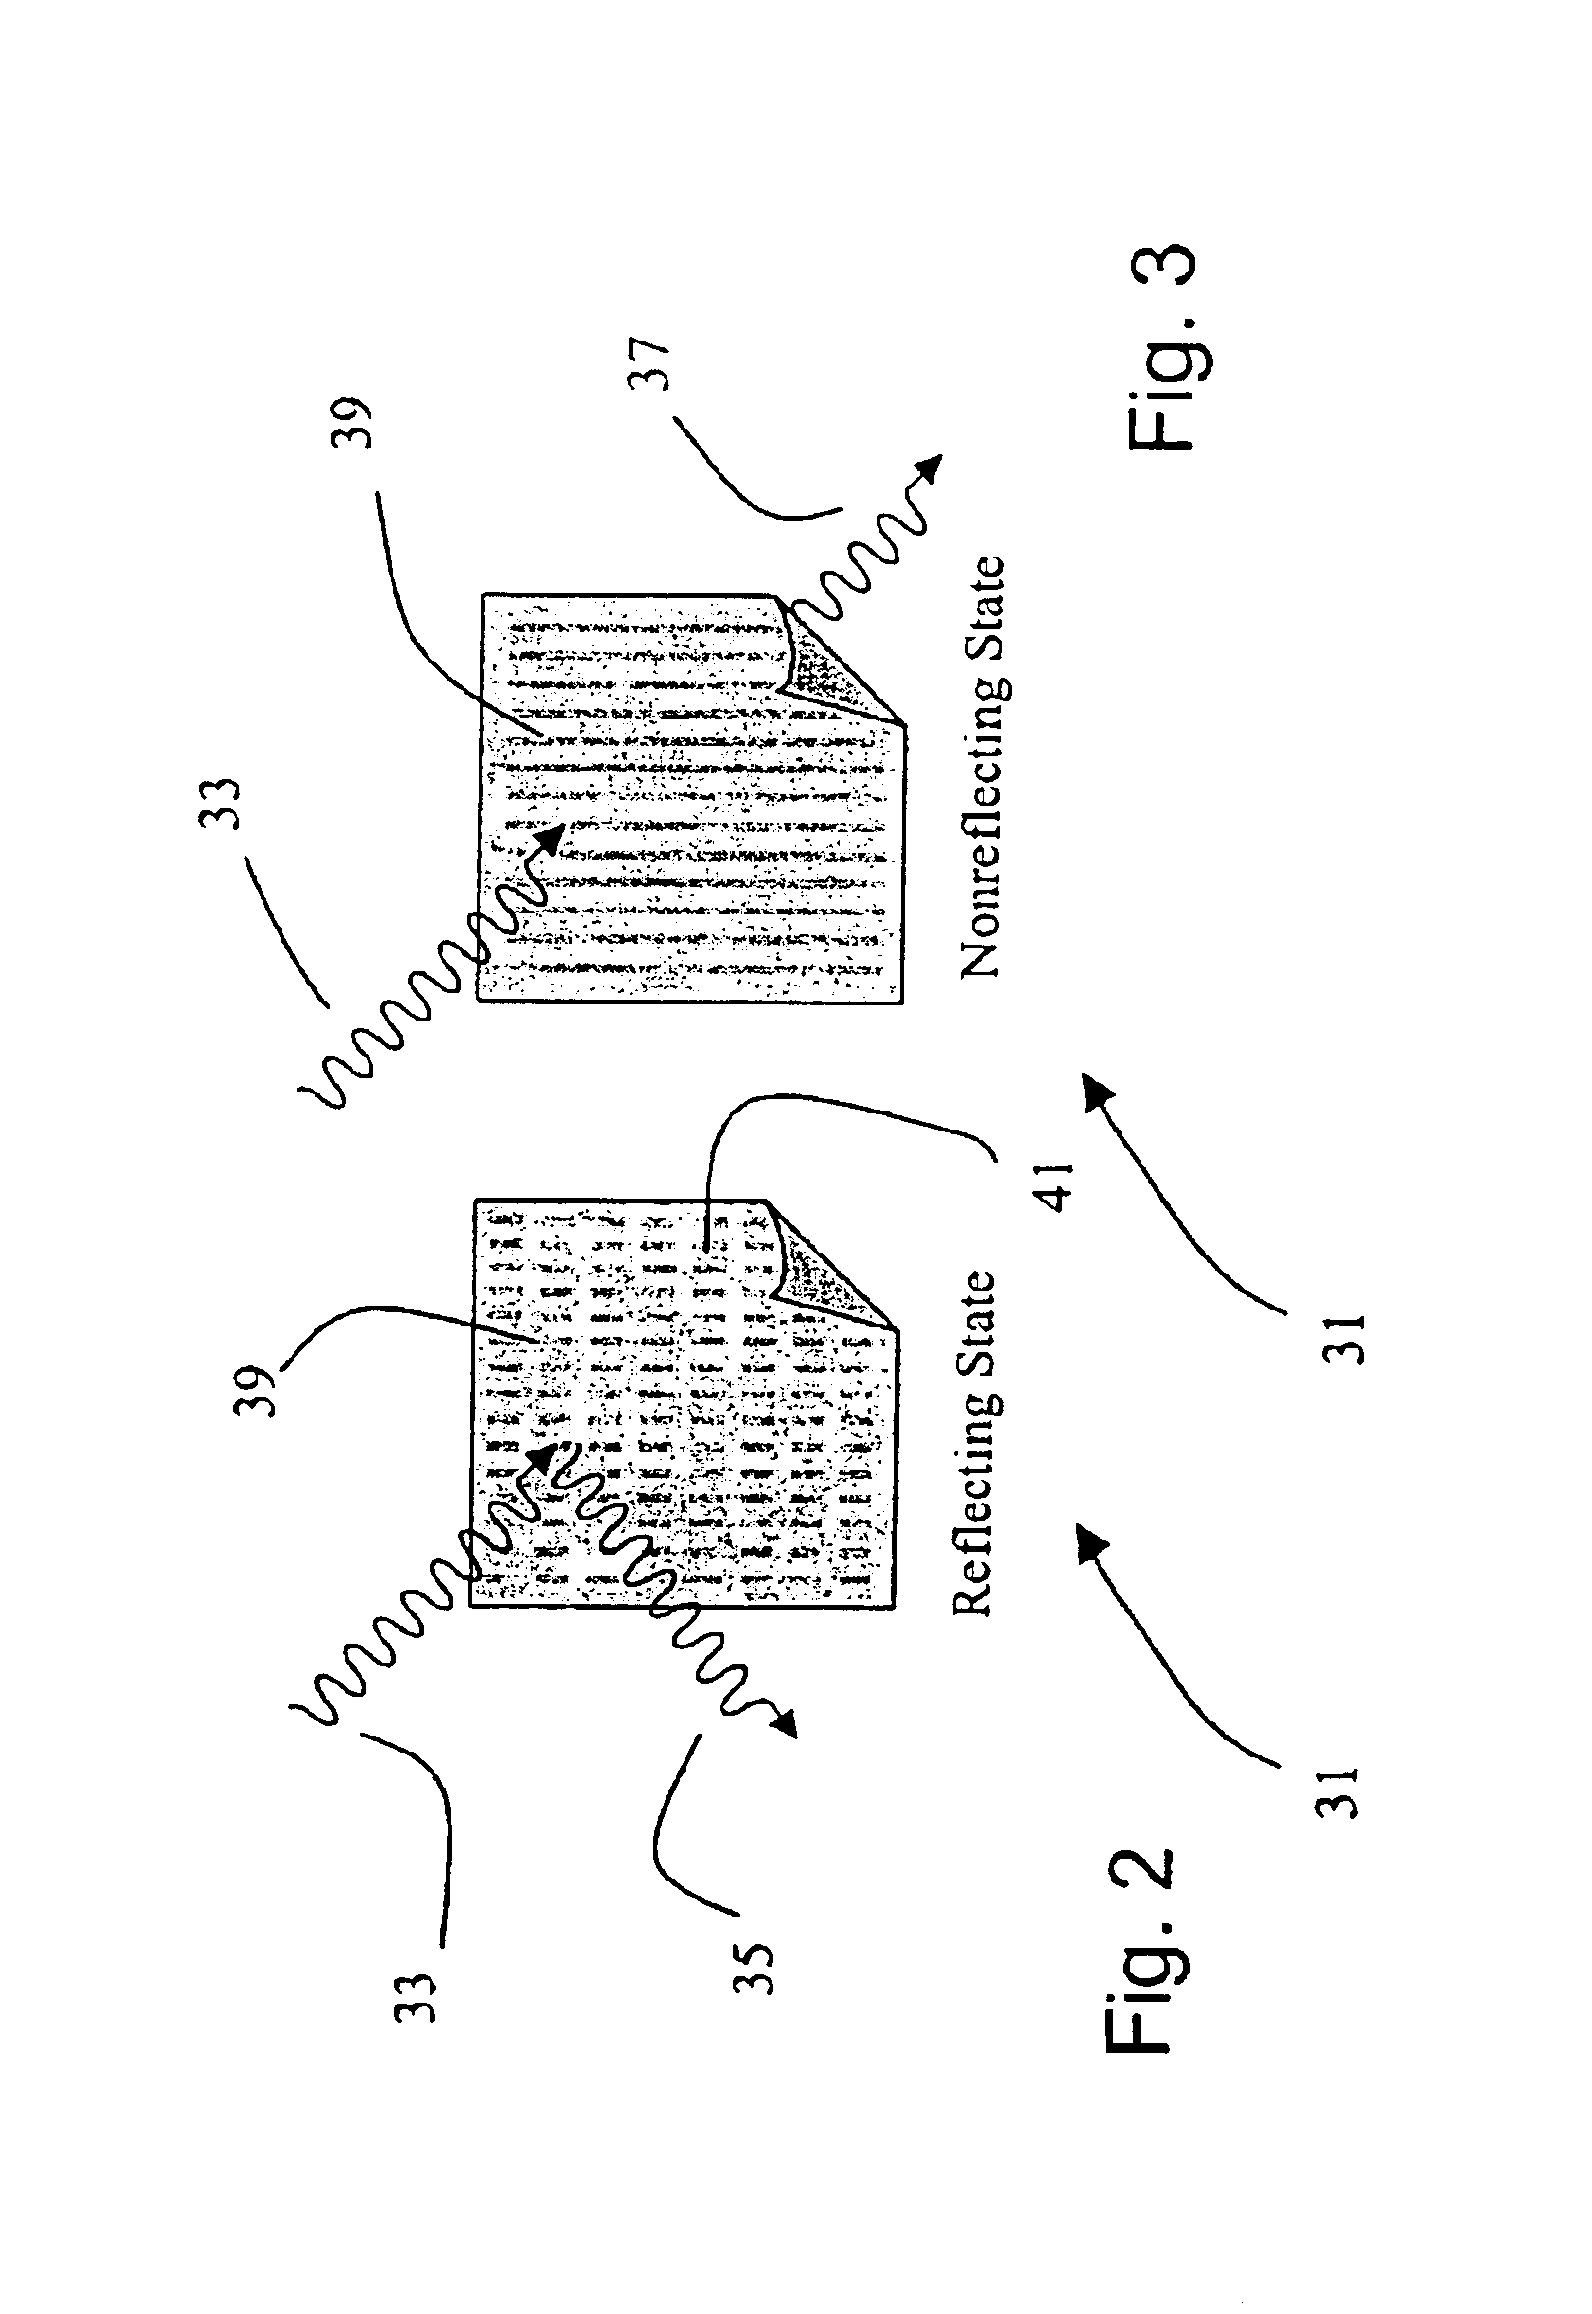 Phase change switches and circuits coupling to electromagnetic waves containing phase change switches